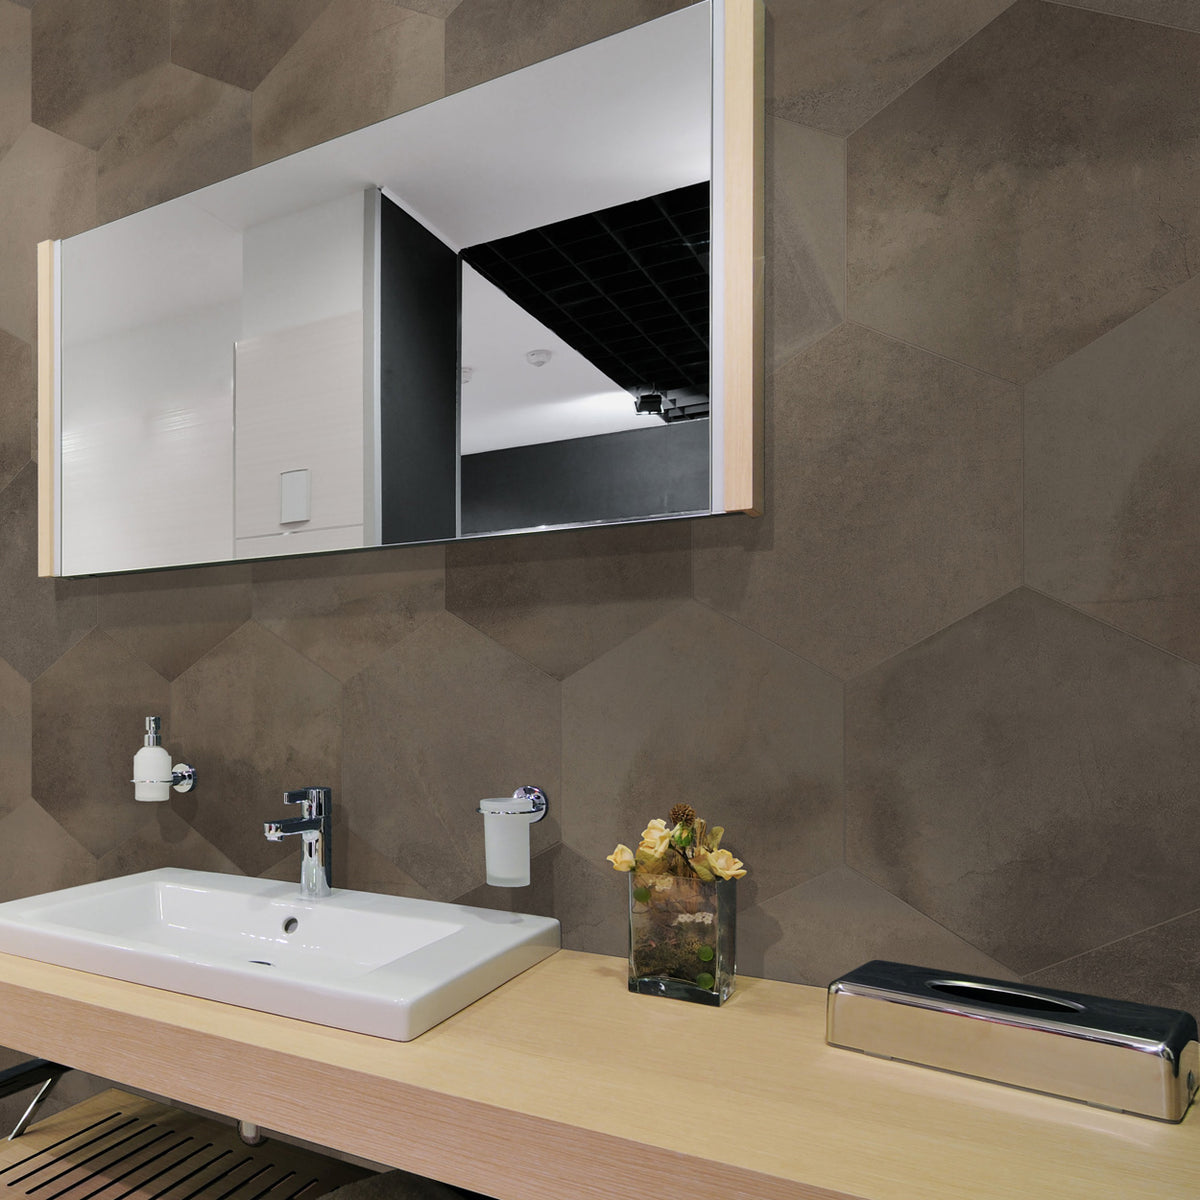 Lungarno Ceramics - Disk 14 in. x 16 in. Porcelain Hexagon Tile - Brown Wall Install